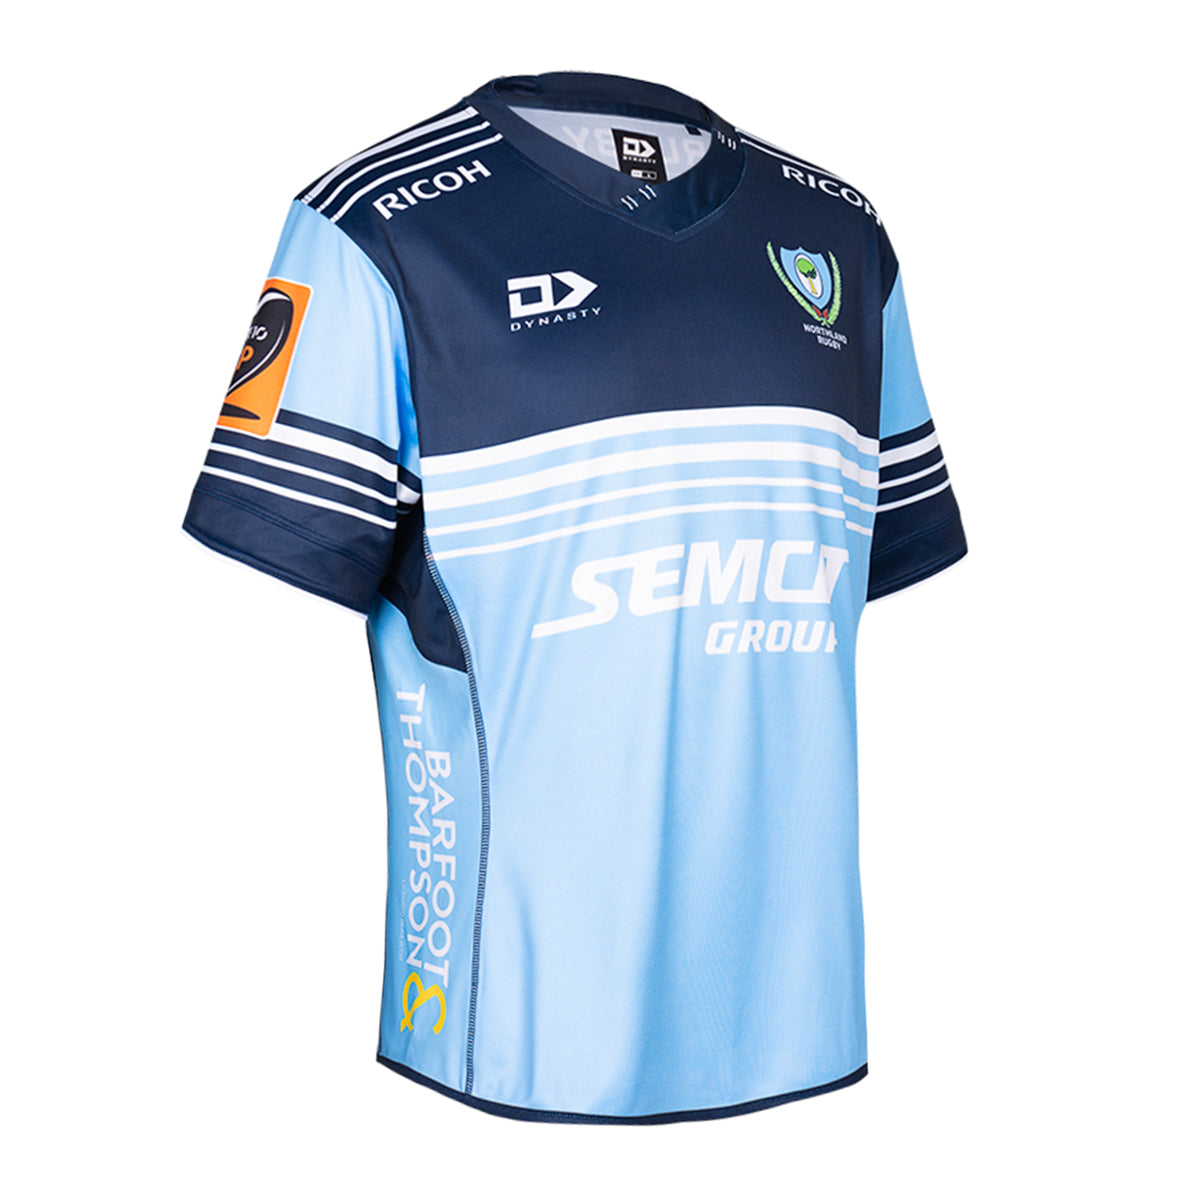 northland rugby jersey